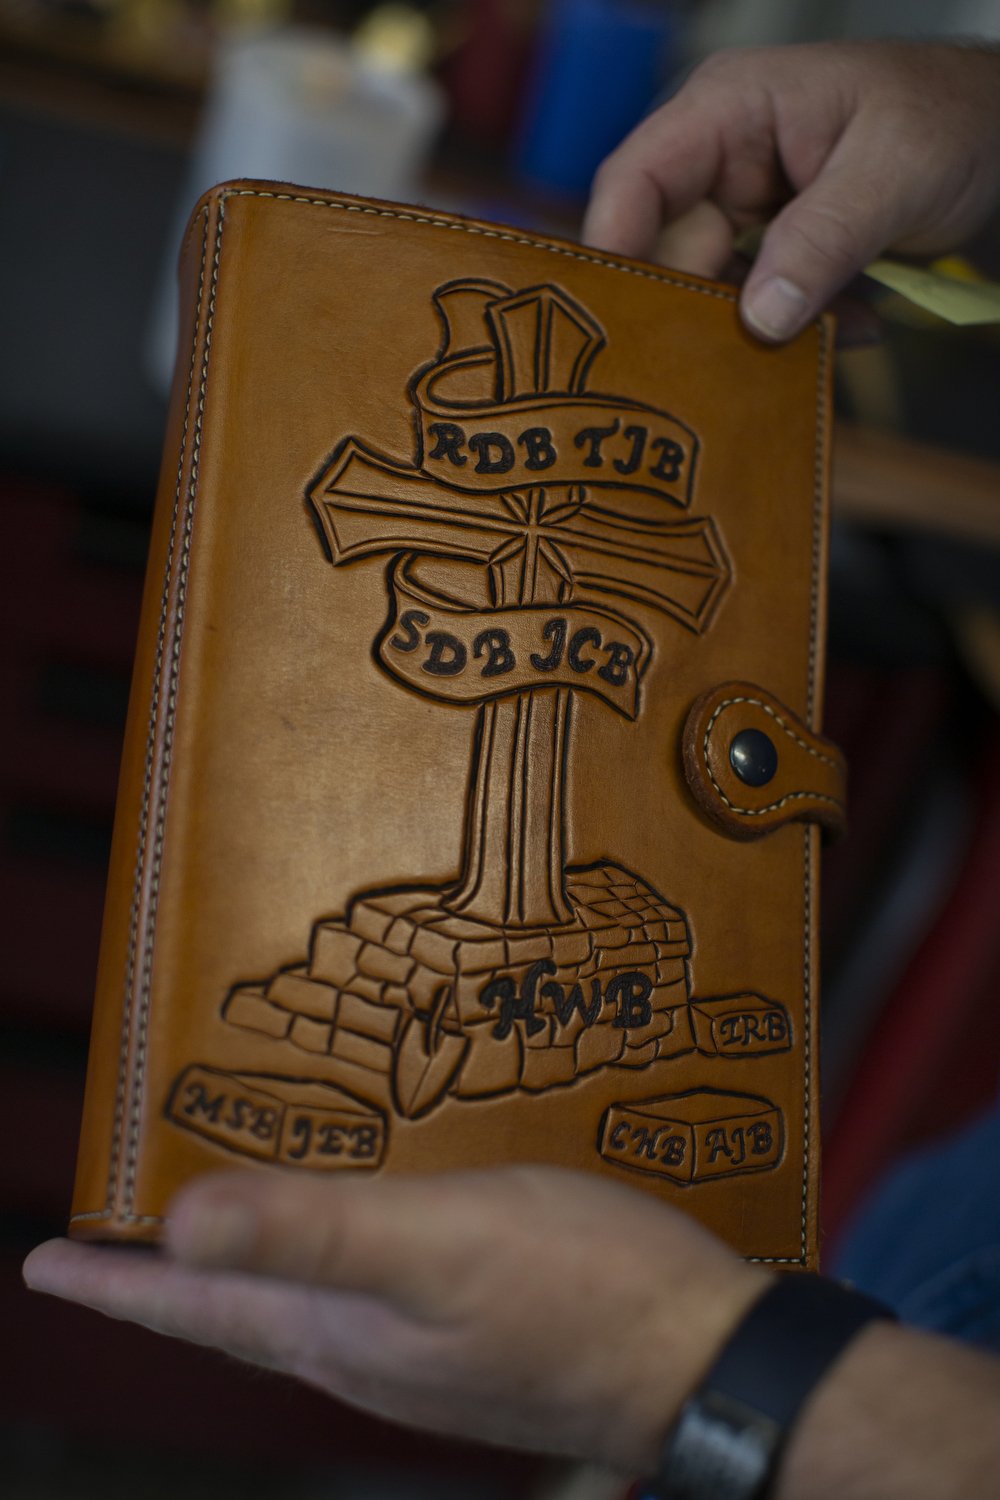  Michael Schneider, a retired Marine Corps Master Sergeant, holds a leather Bible cover he made in his garage studio at his home in Swansboro, North Carolina. He uses art and music therapy to help manage his epilepsy and PTSD following a traumatic br